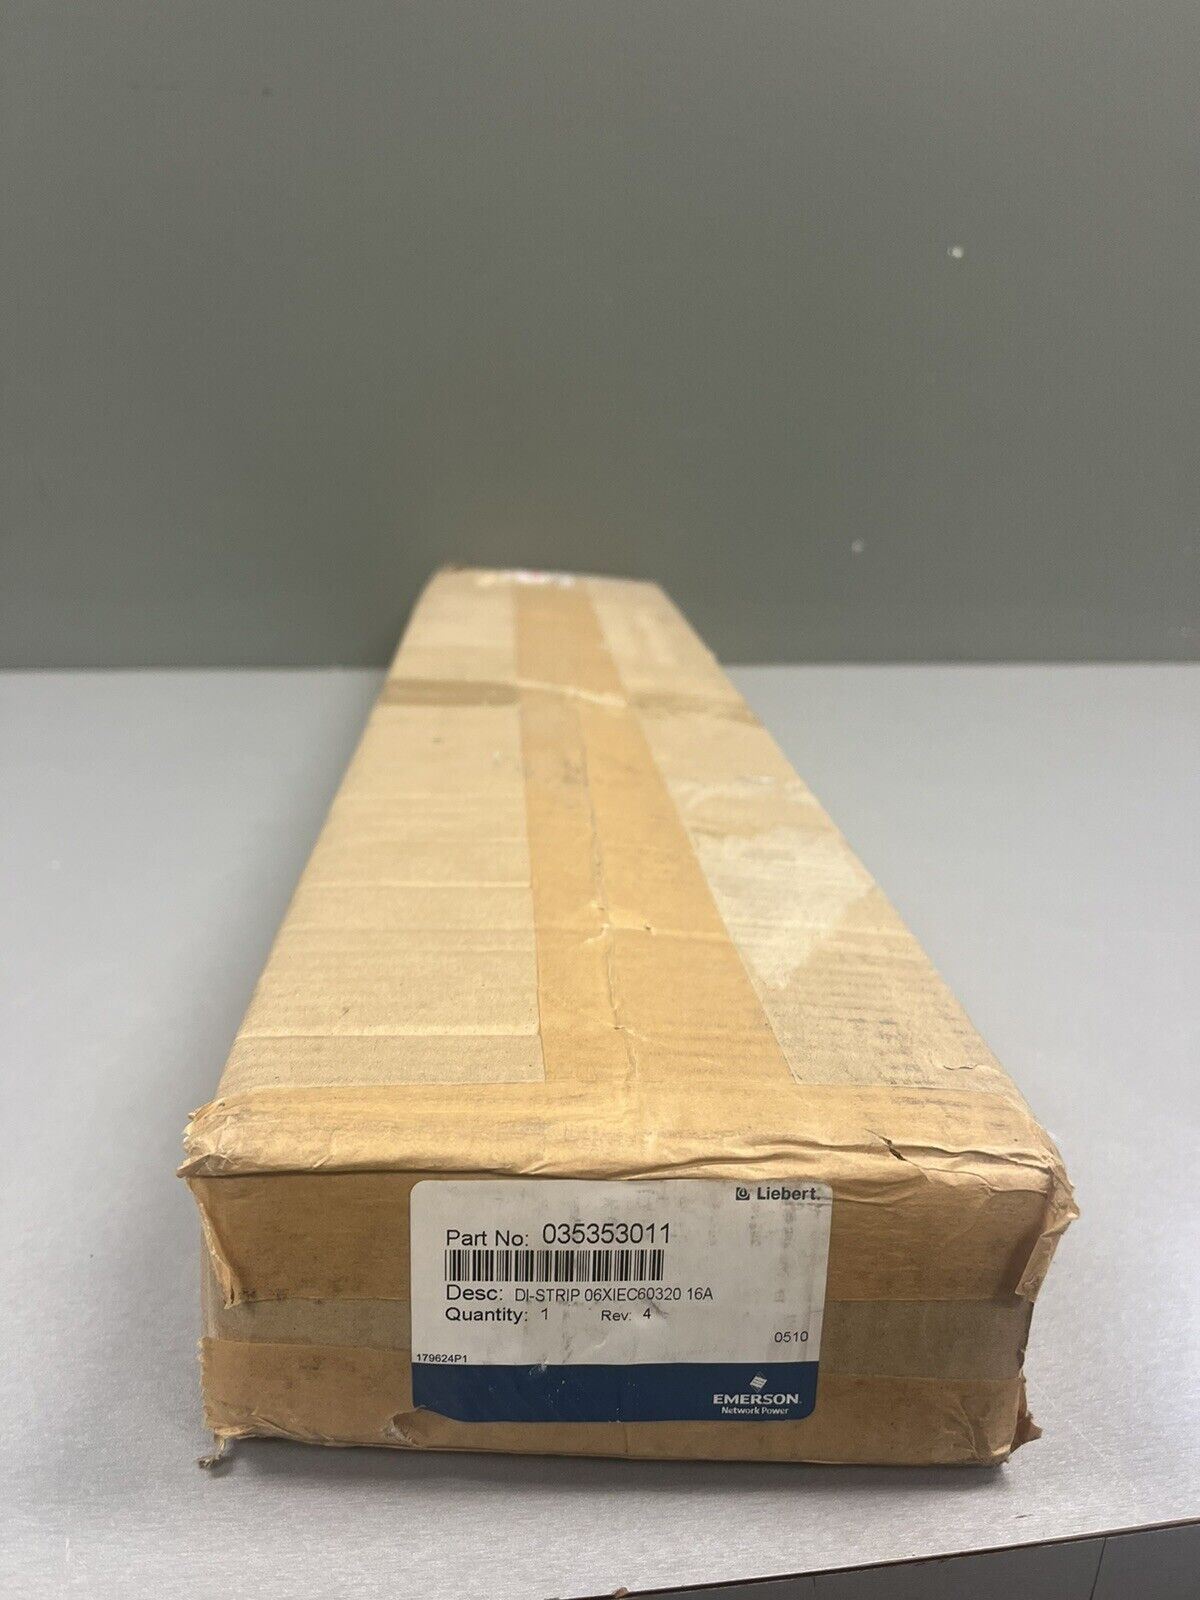 New Sealed Emerson Knurr 035353011 DI-STRIP Power Distribution Center